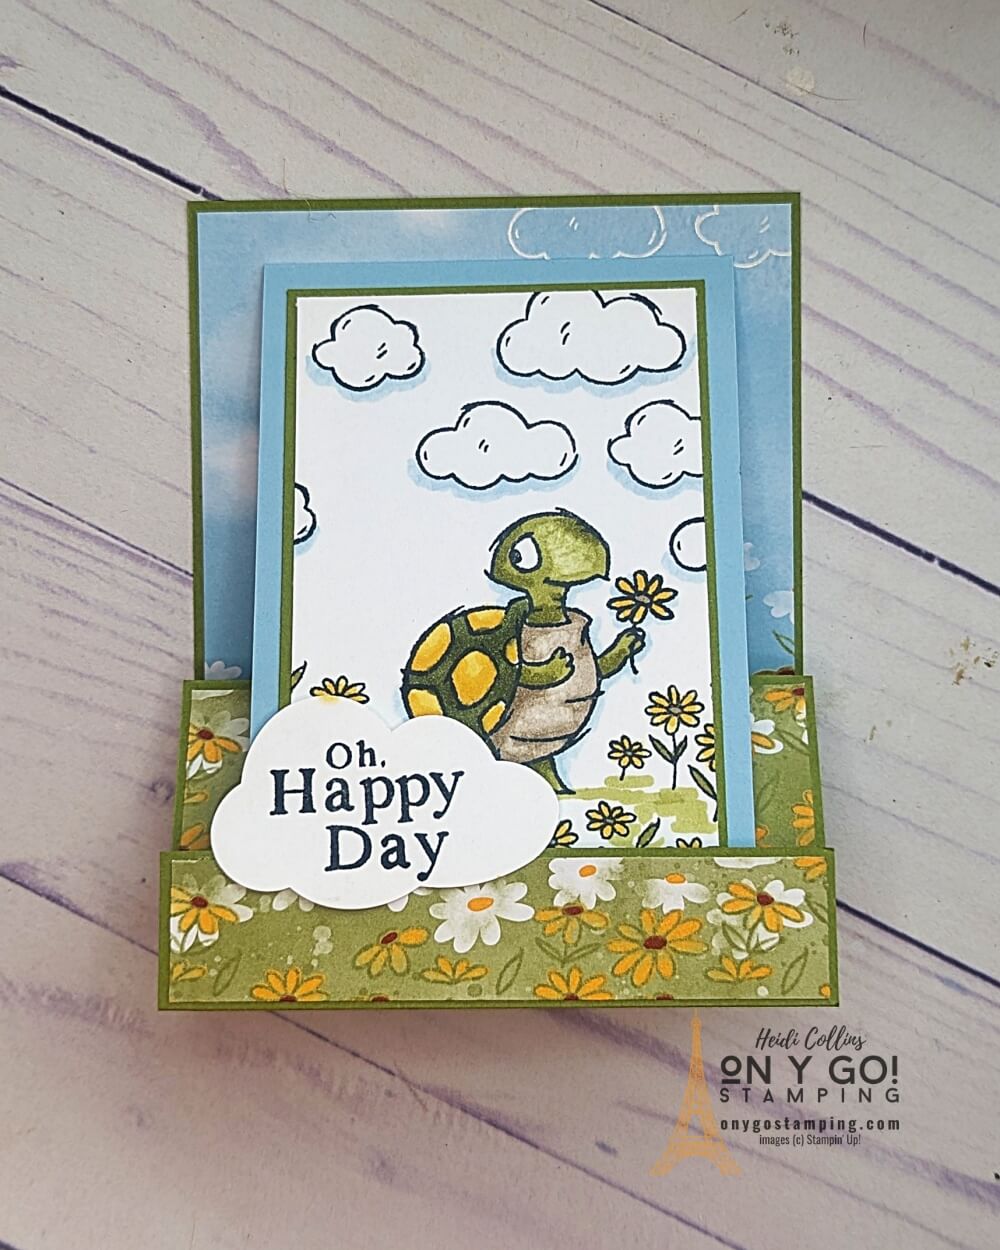 Rain or shine, you can always make a fun and beautiful card with the Playing in the Rain stamp set from Stampin' Up!. This card uses the cheerful Rain or Shine patterned paper to add a sweet touch and will make any recipient smile. With easy folding instructions, anyone can make this card for their special someone for any occasion.